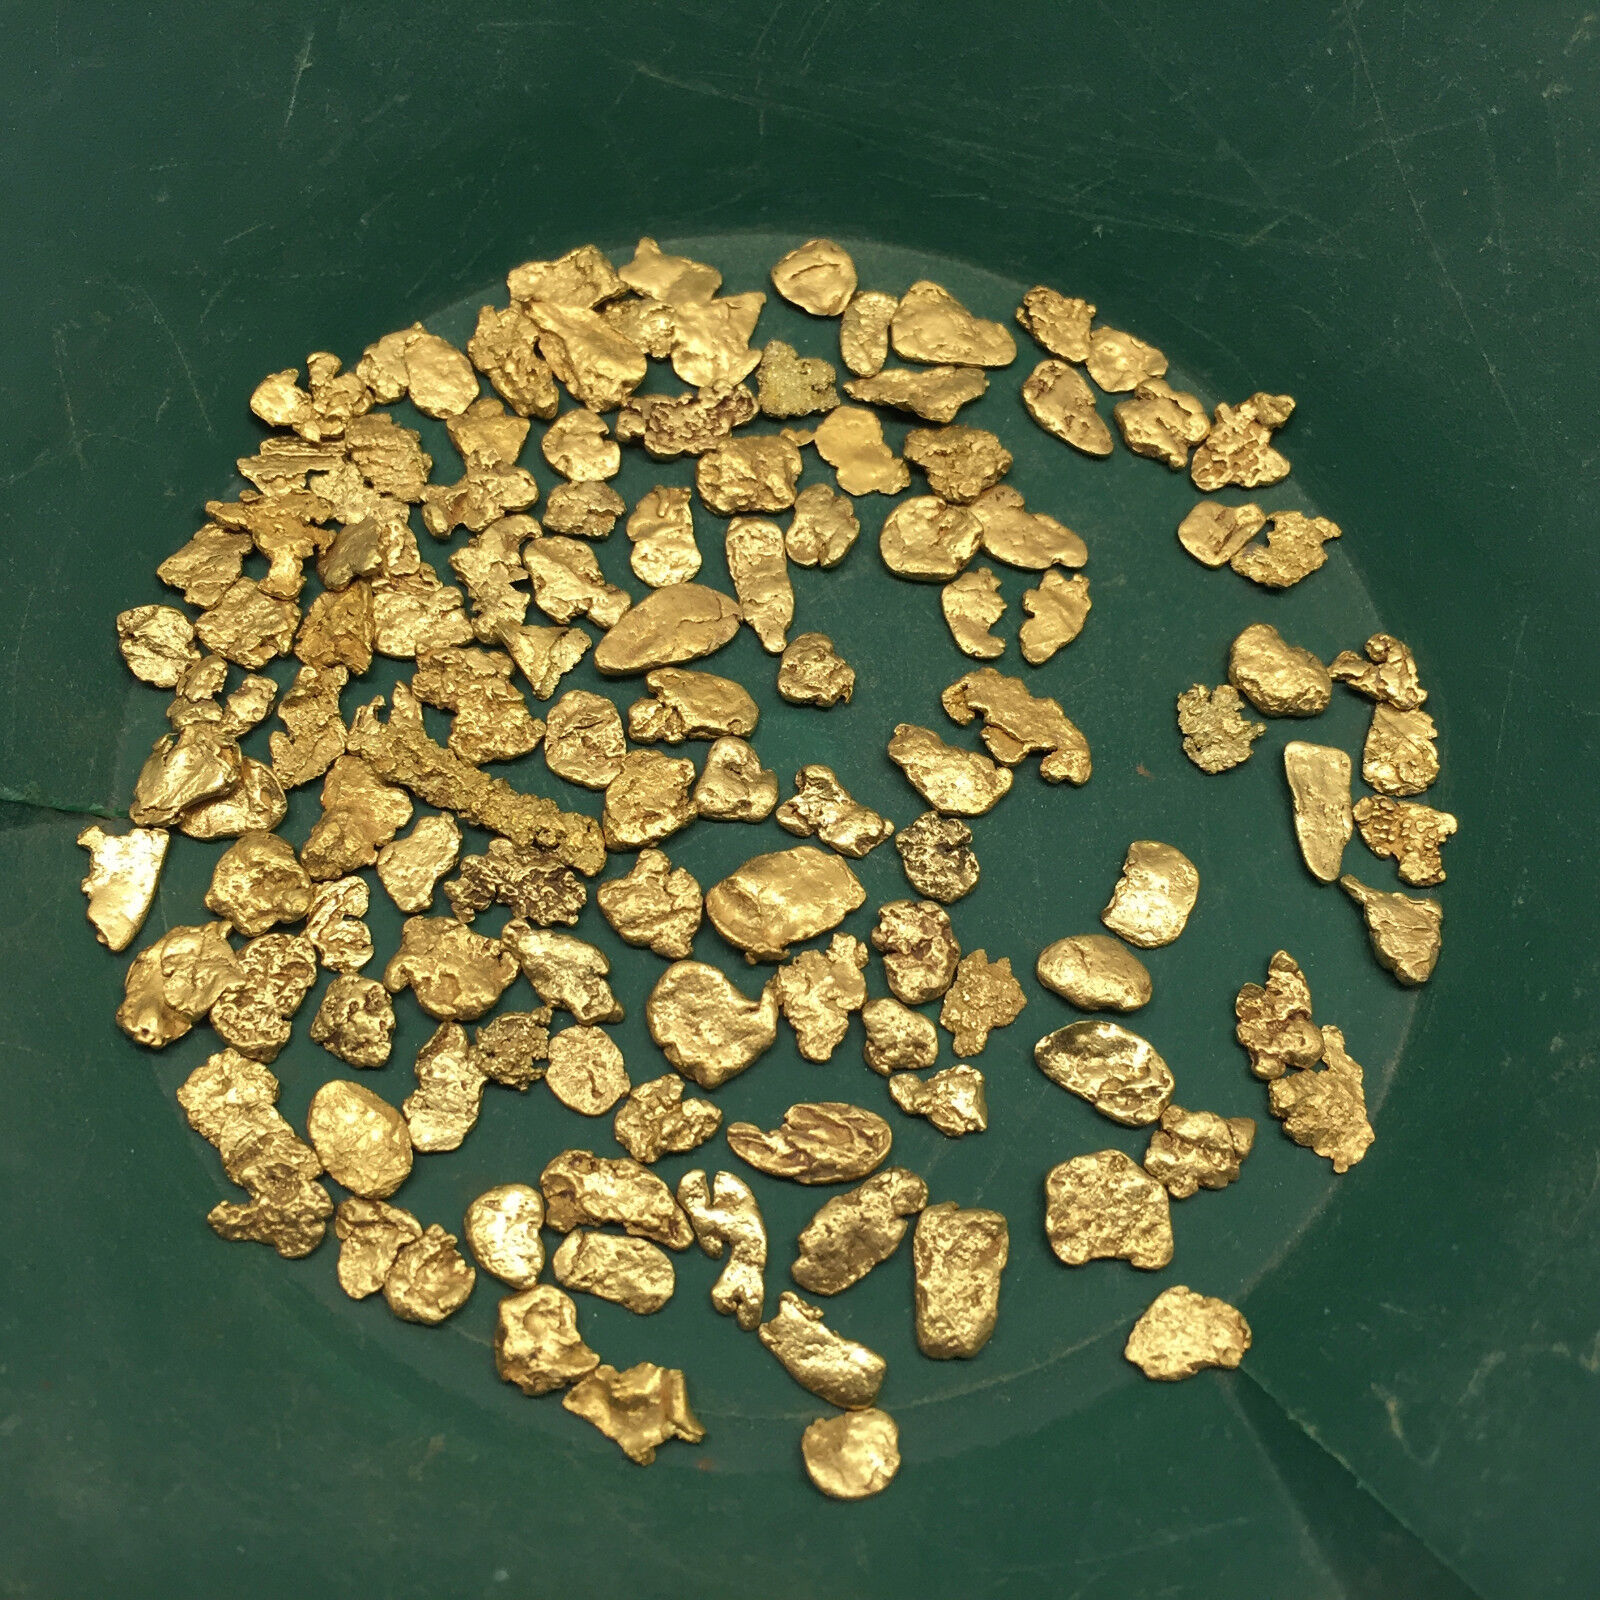 5 lb Gold Paydirt Unsearched & Gold Added Panning Flake Nugget Motherload